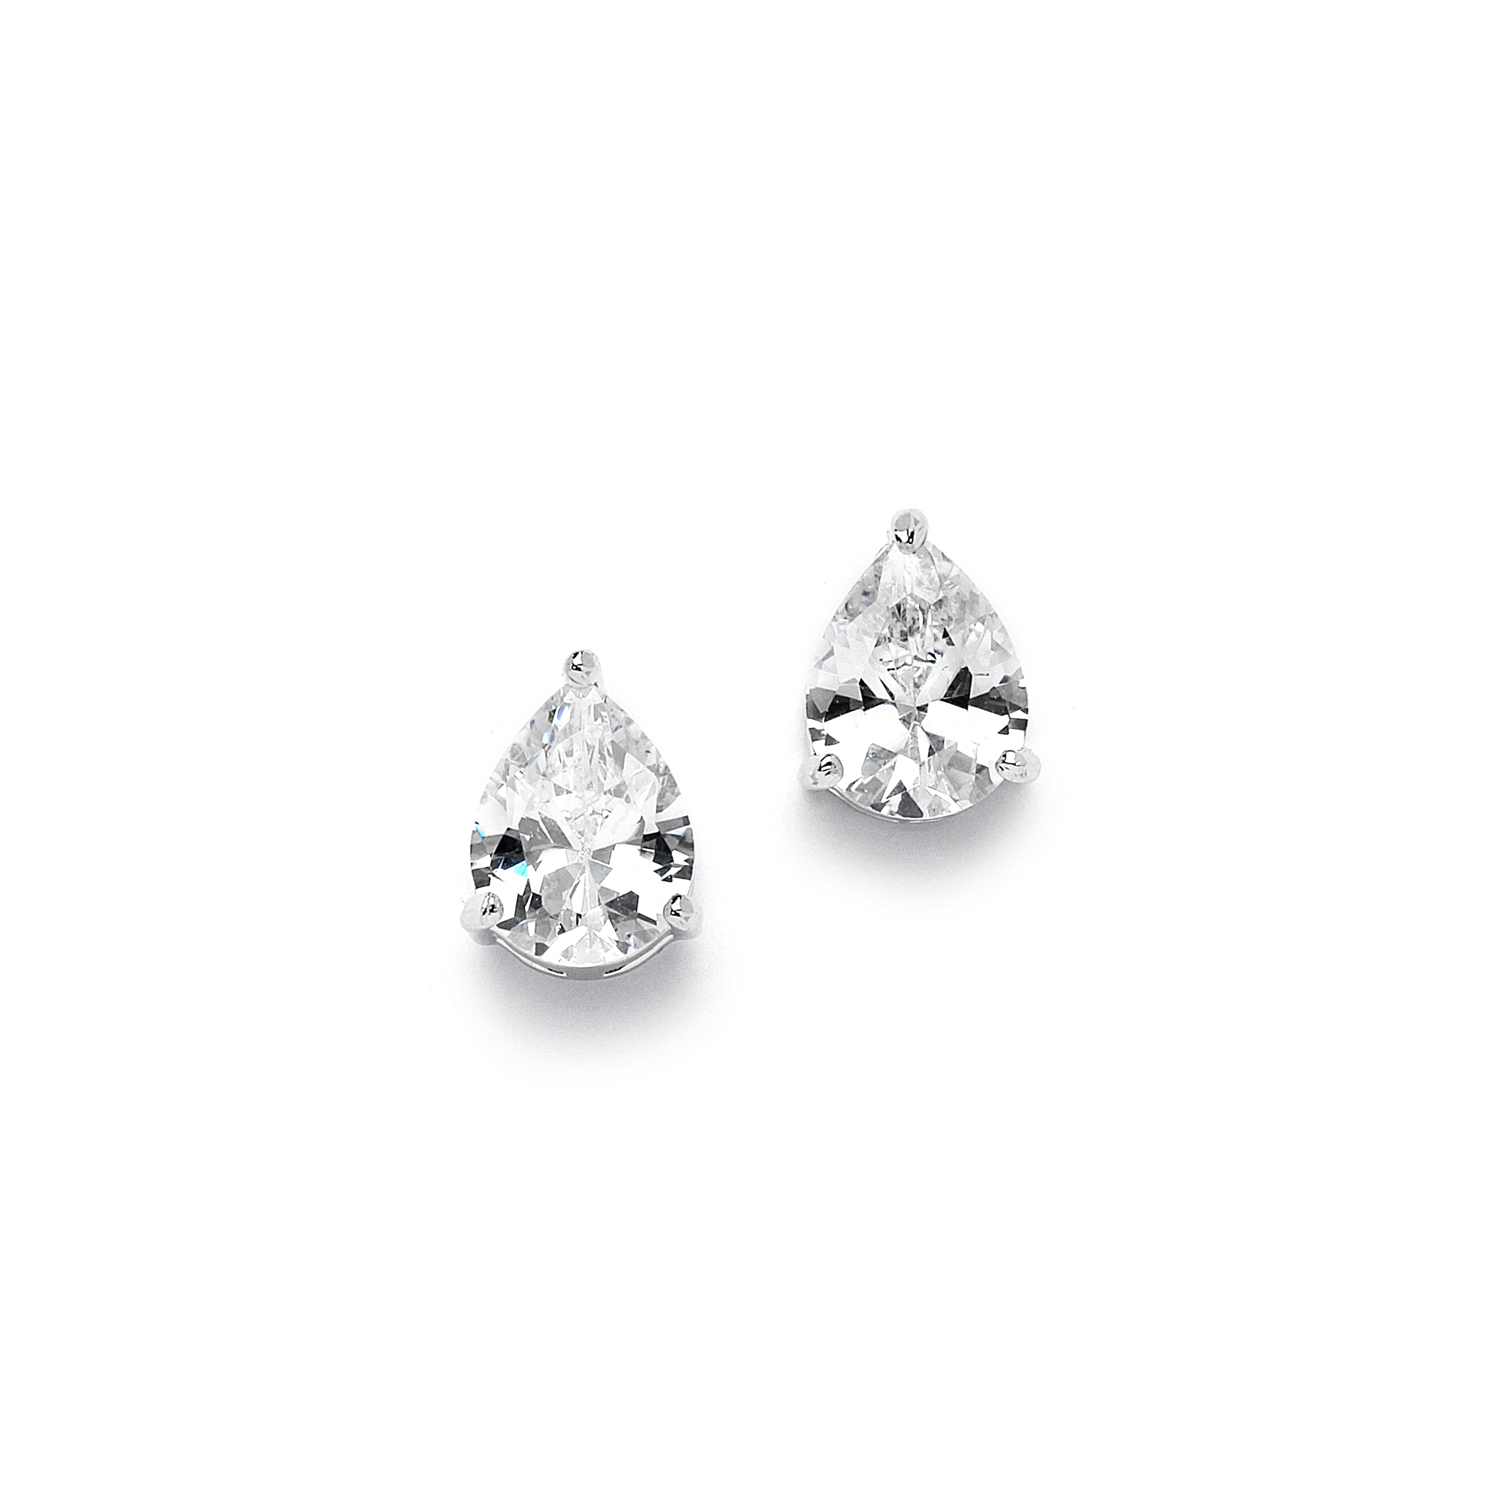 2.00 Ct. Cubic Zirconia Pear Shape Stud Earrings for Weddings or Bridesmaids<br>3989E